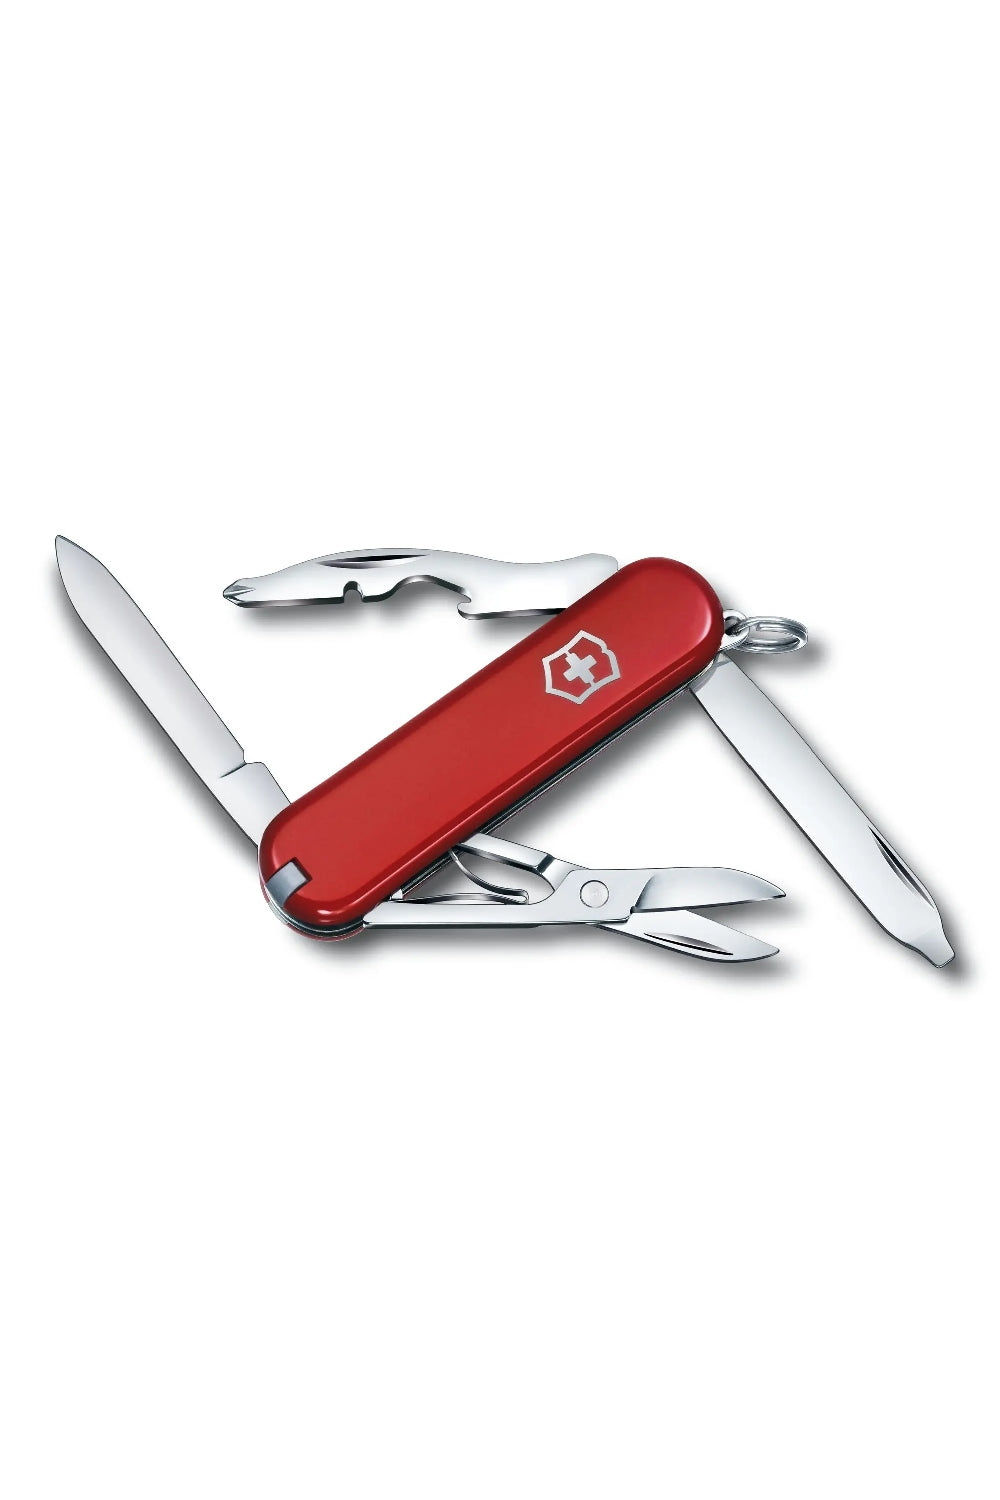 Victorinox Swiss Army Pocket Knife Compact Red